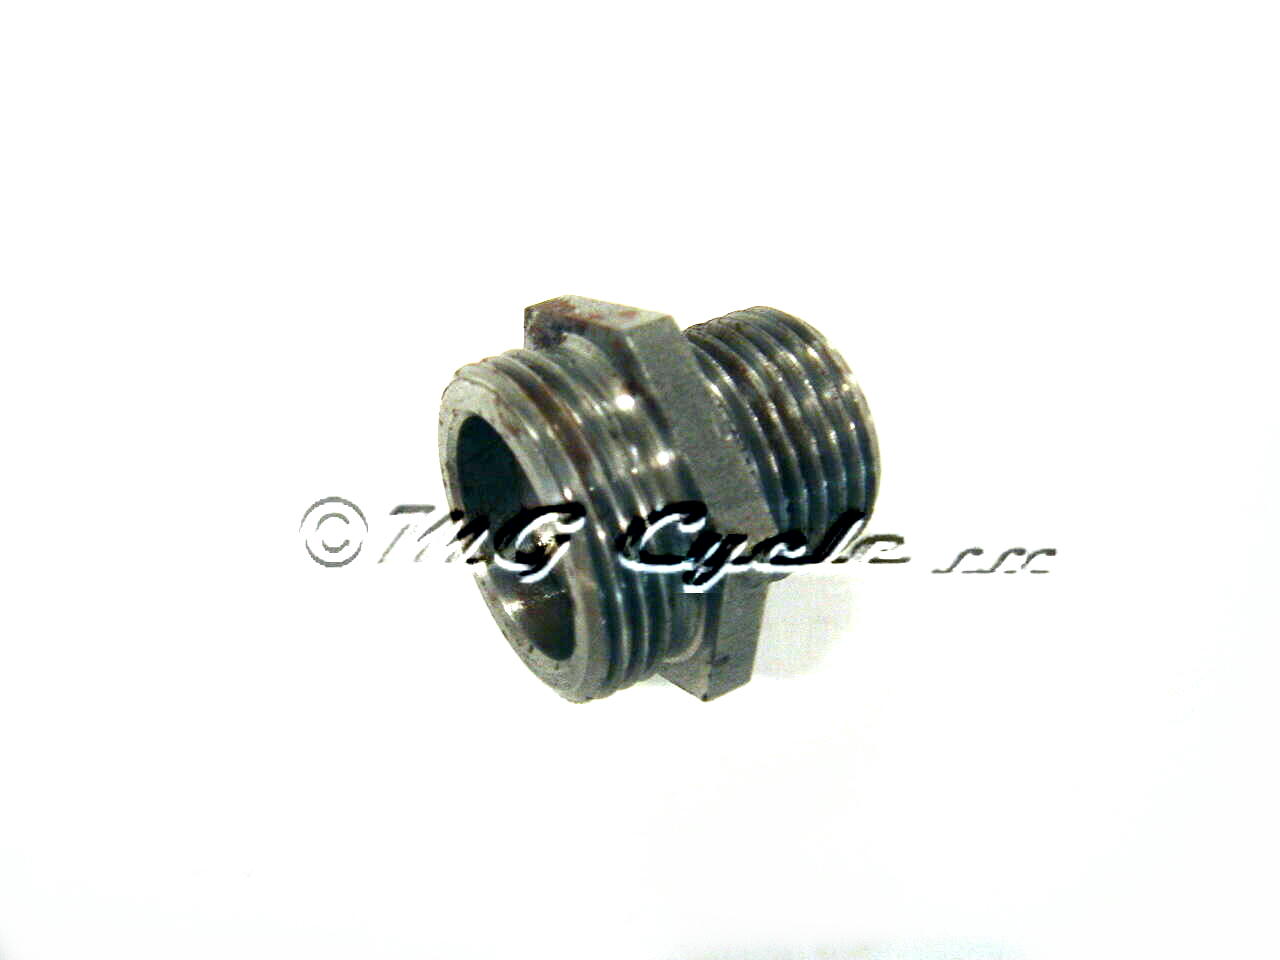 Oil filter adapter, for larger oil filter 30153000 or HF551 - Click Image to Close